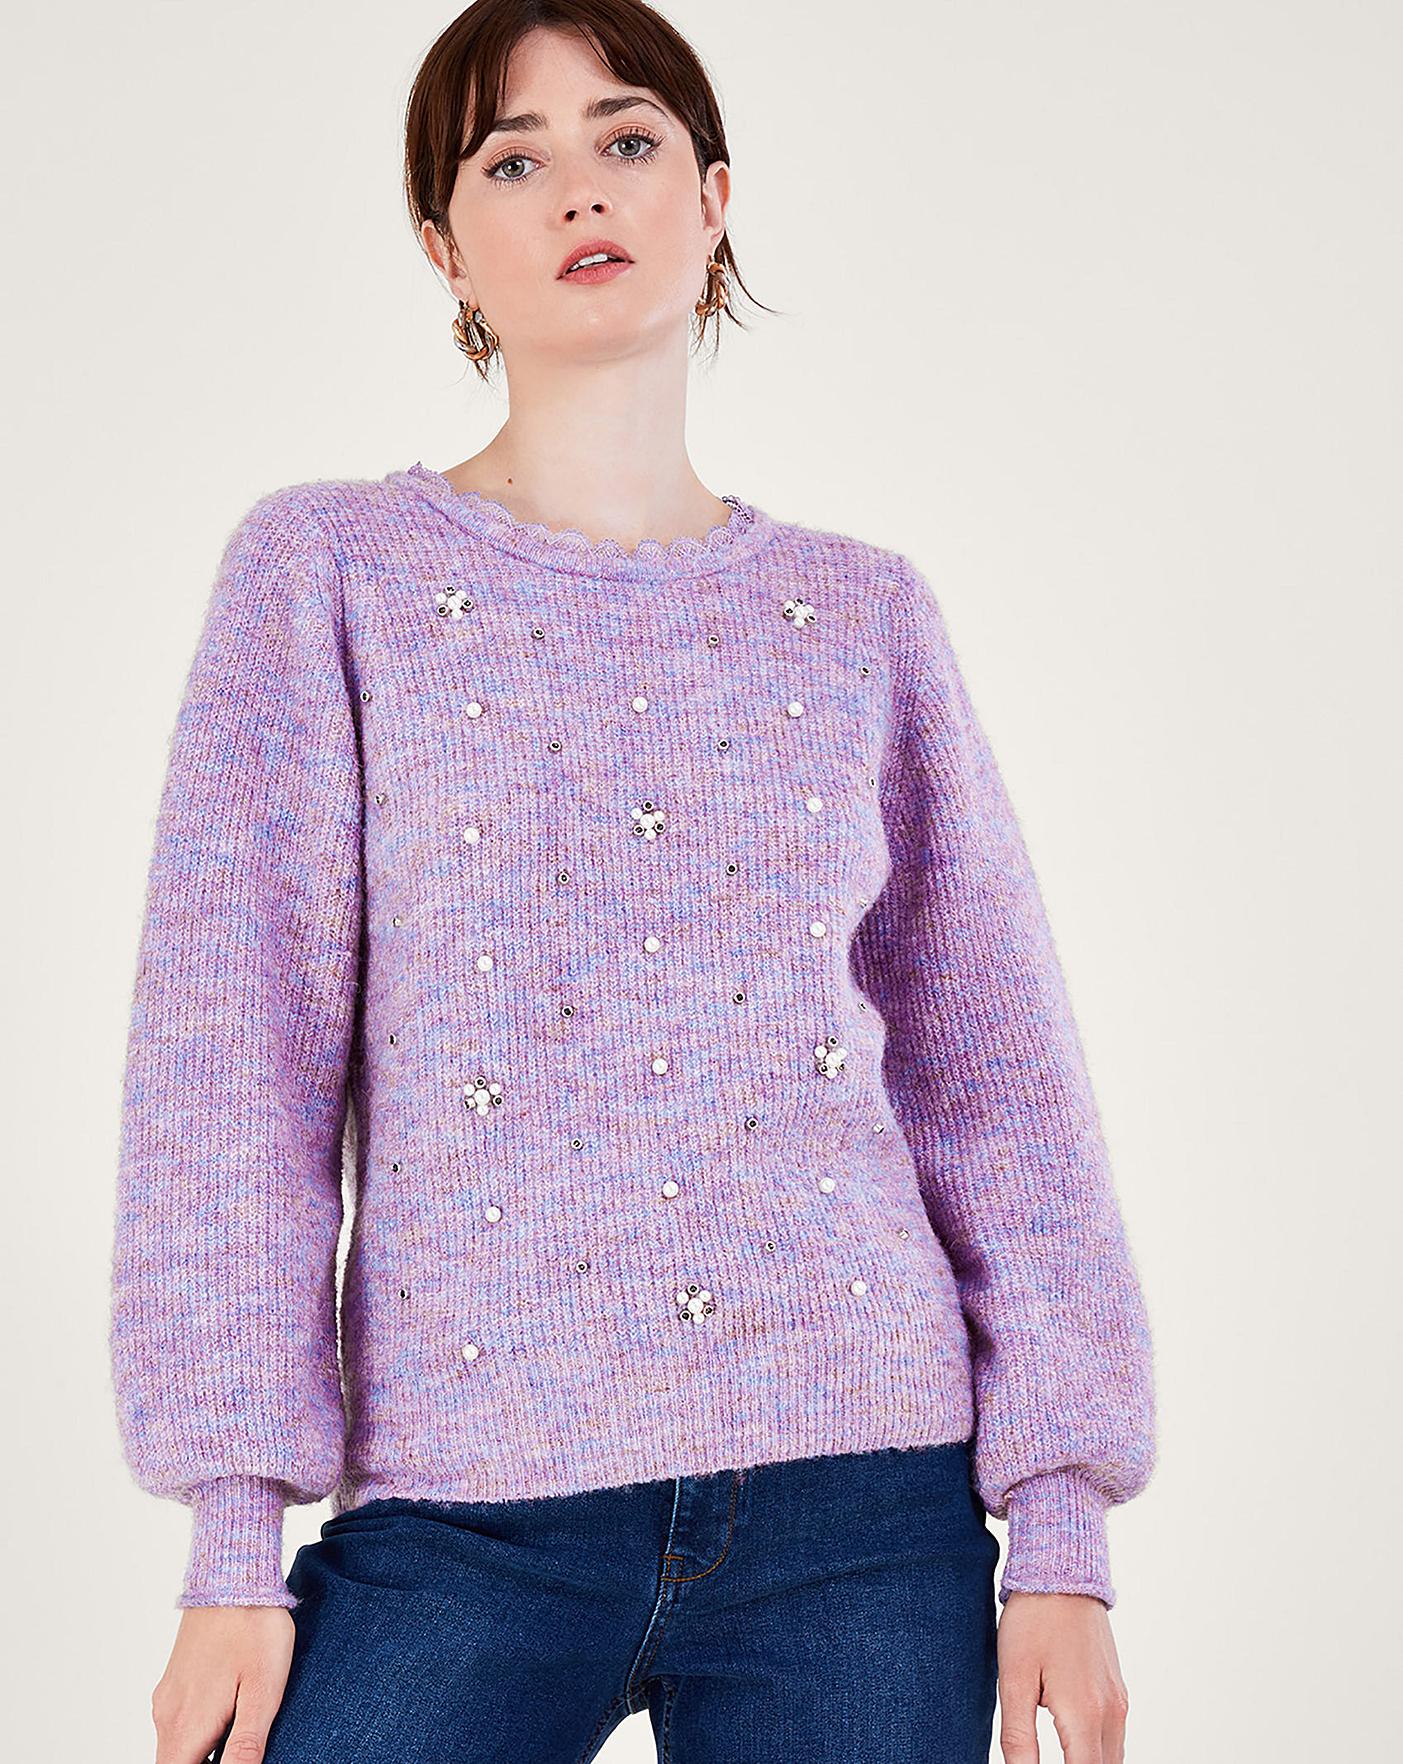 Monsoon Pearl and Crystal Jumper | J D Williams